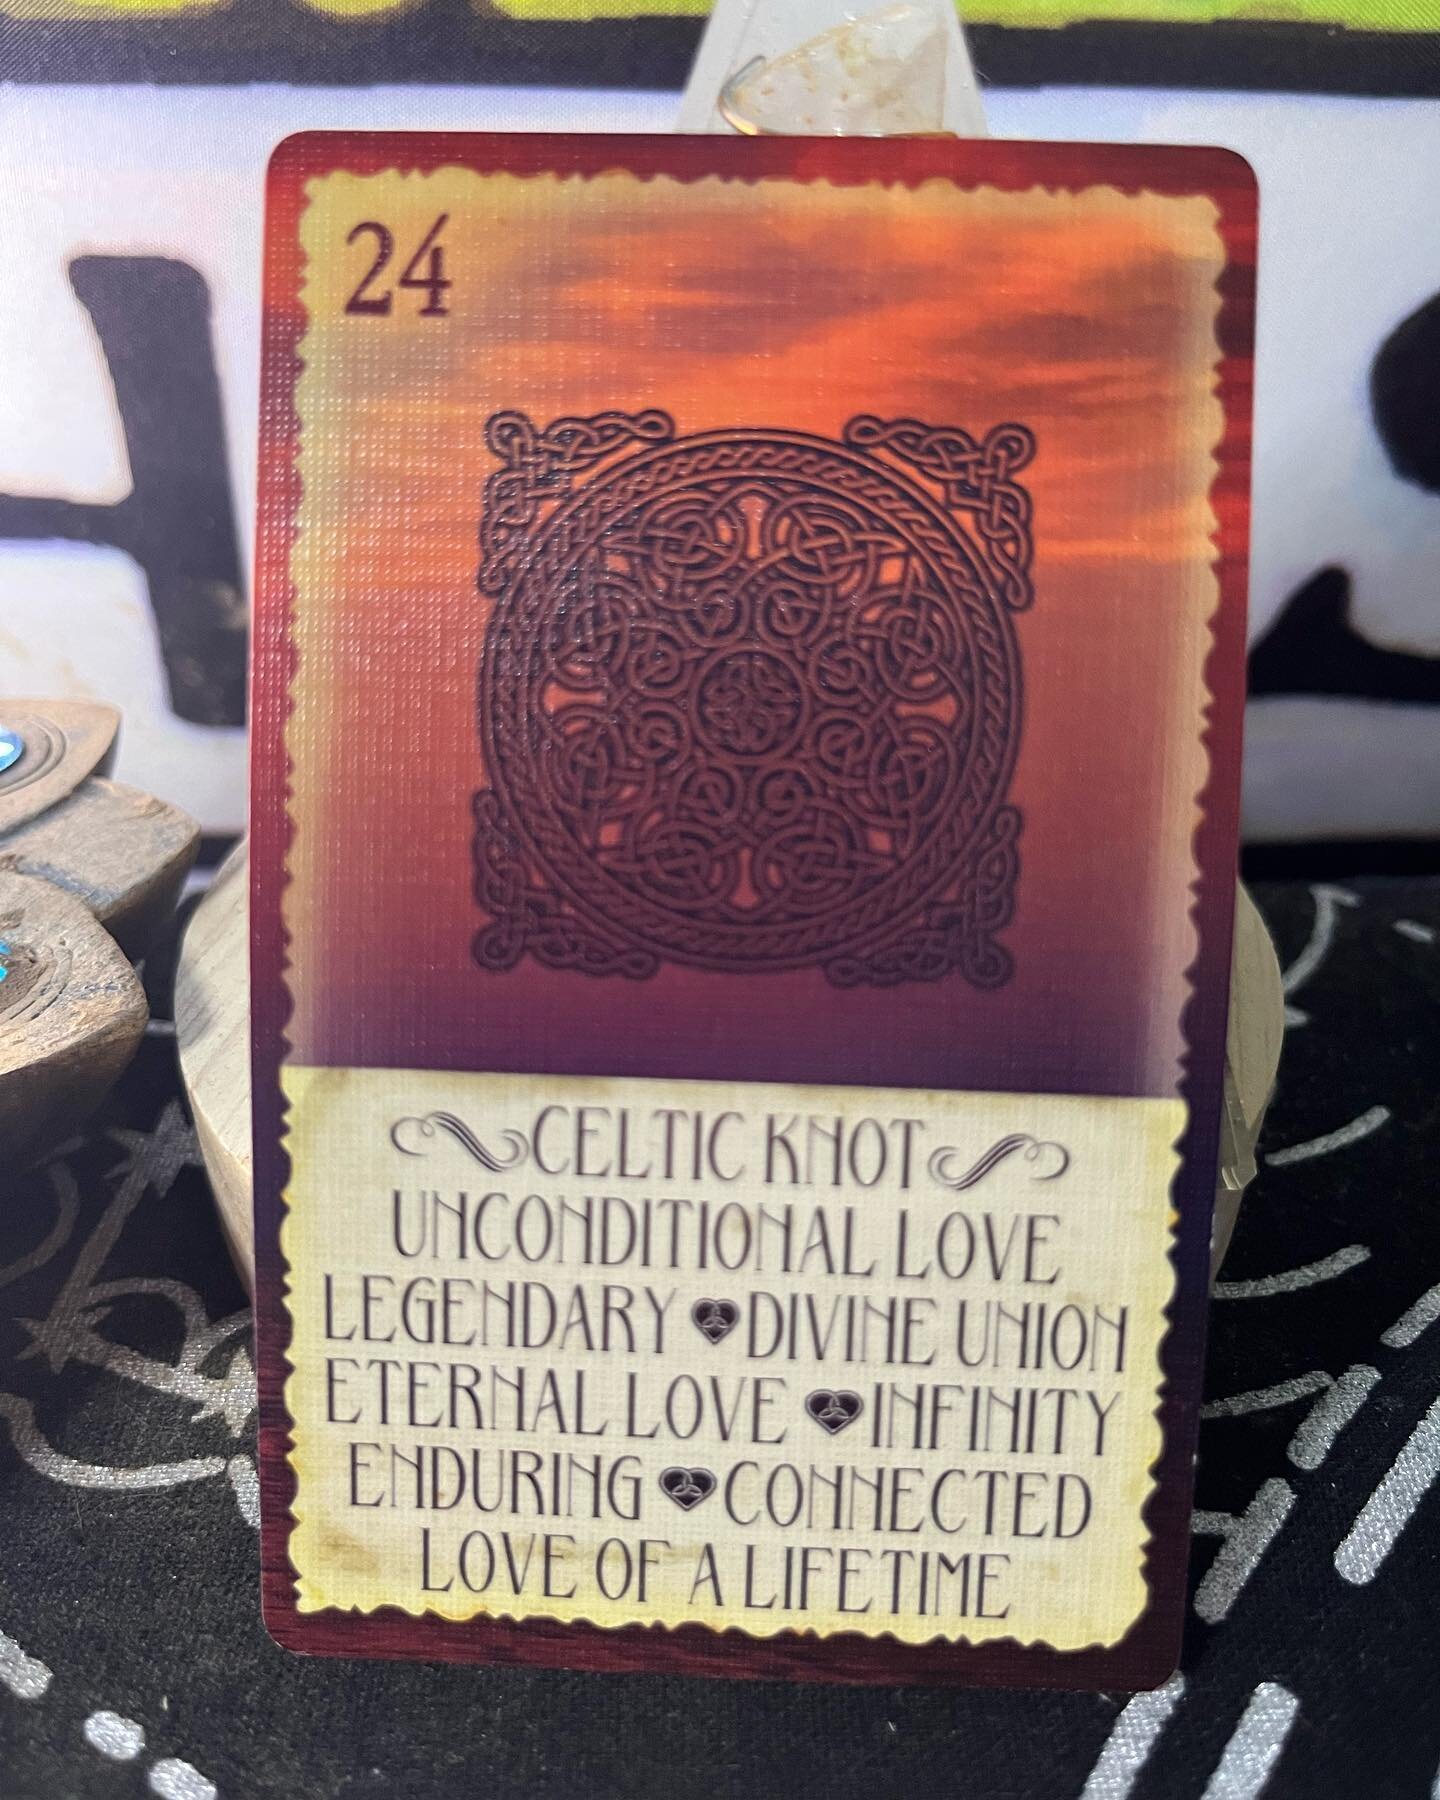 Divine union. Love of a lifetime. Eternal love. Blessed love. Unconditional love. It&rsquo;s time. This jumped yesterday also. That&rsquo;s two days in a row this energy showed up. Celtic knot 🪢. This union is divinely protected. 🙏🏻❤️🪬🧿

🧘&zwj;